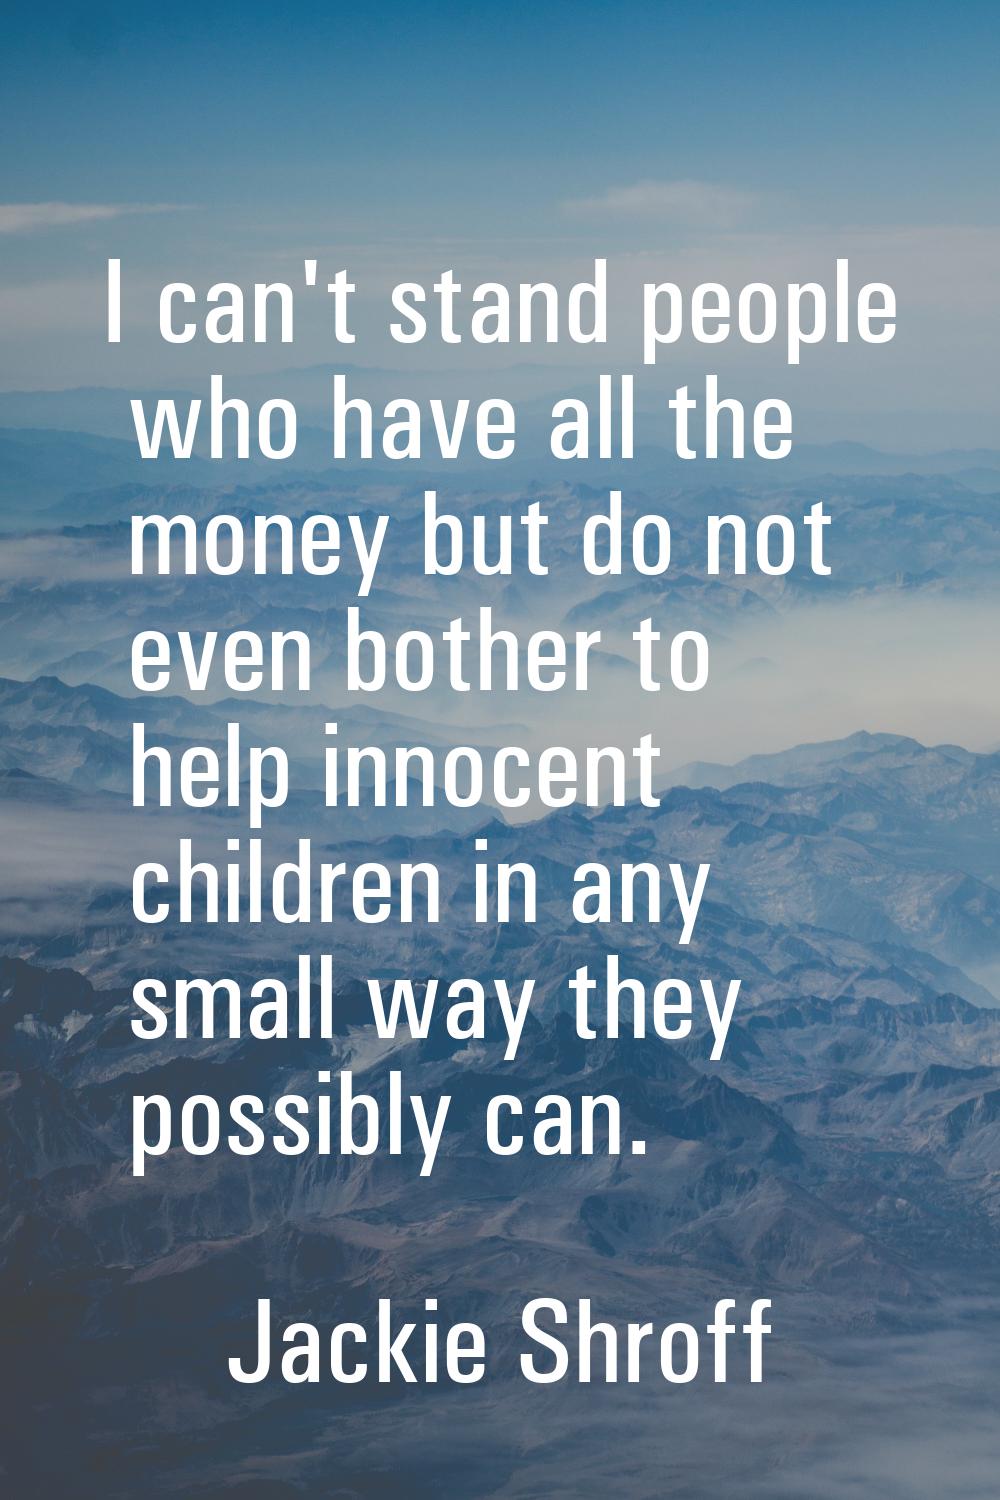 I can't stand people who have all the money but do not even bother to help innocent children in any